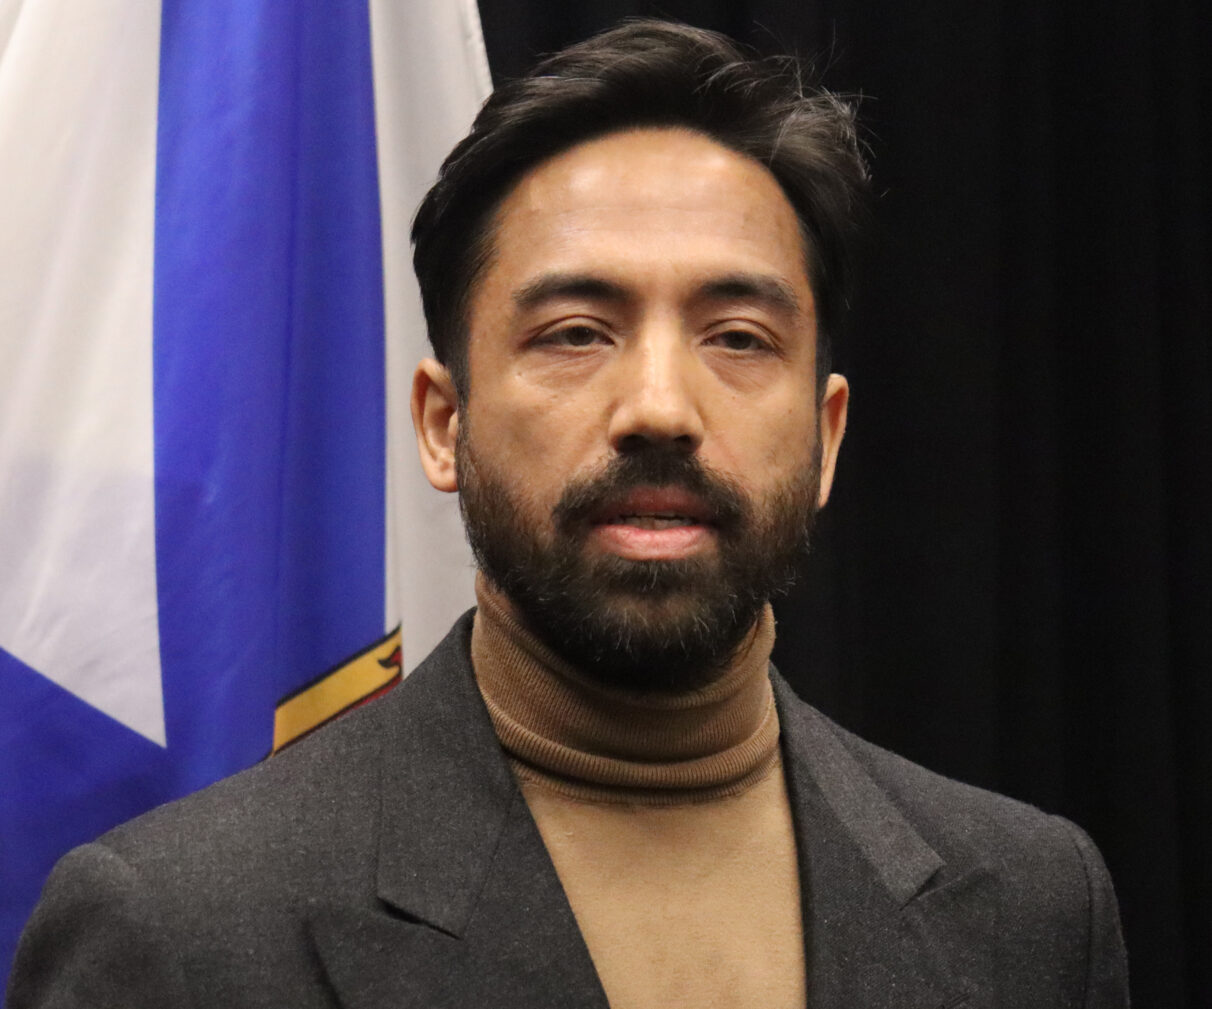 A man with beard standing in front of Nova Scotia flag.